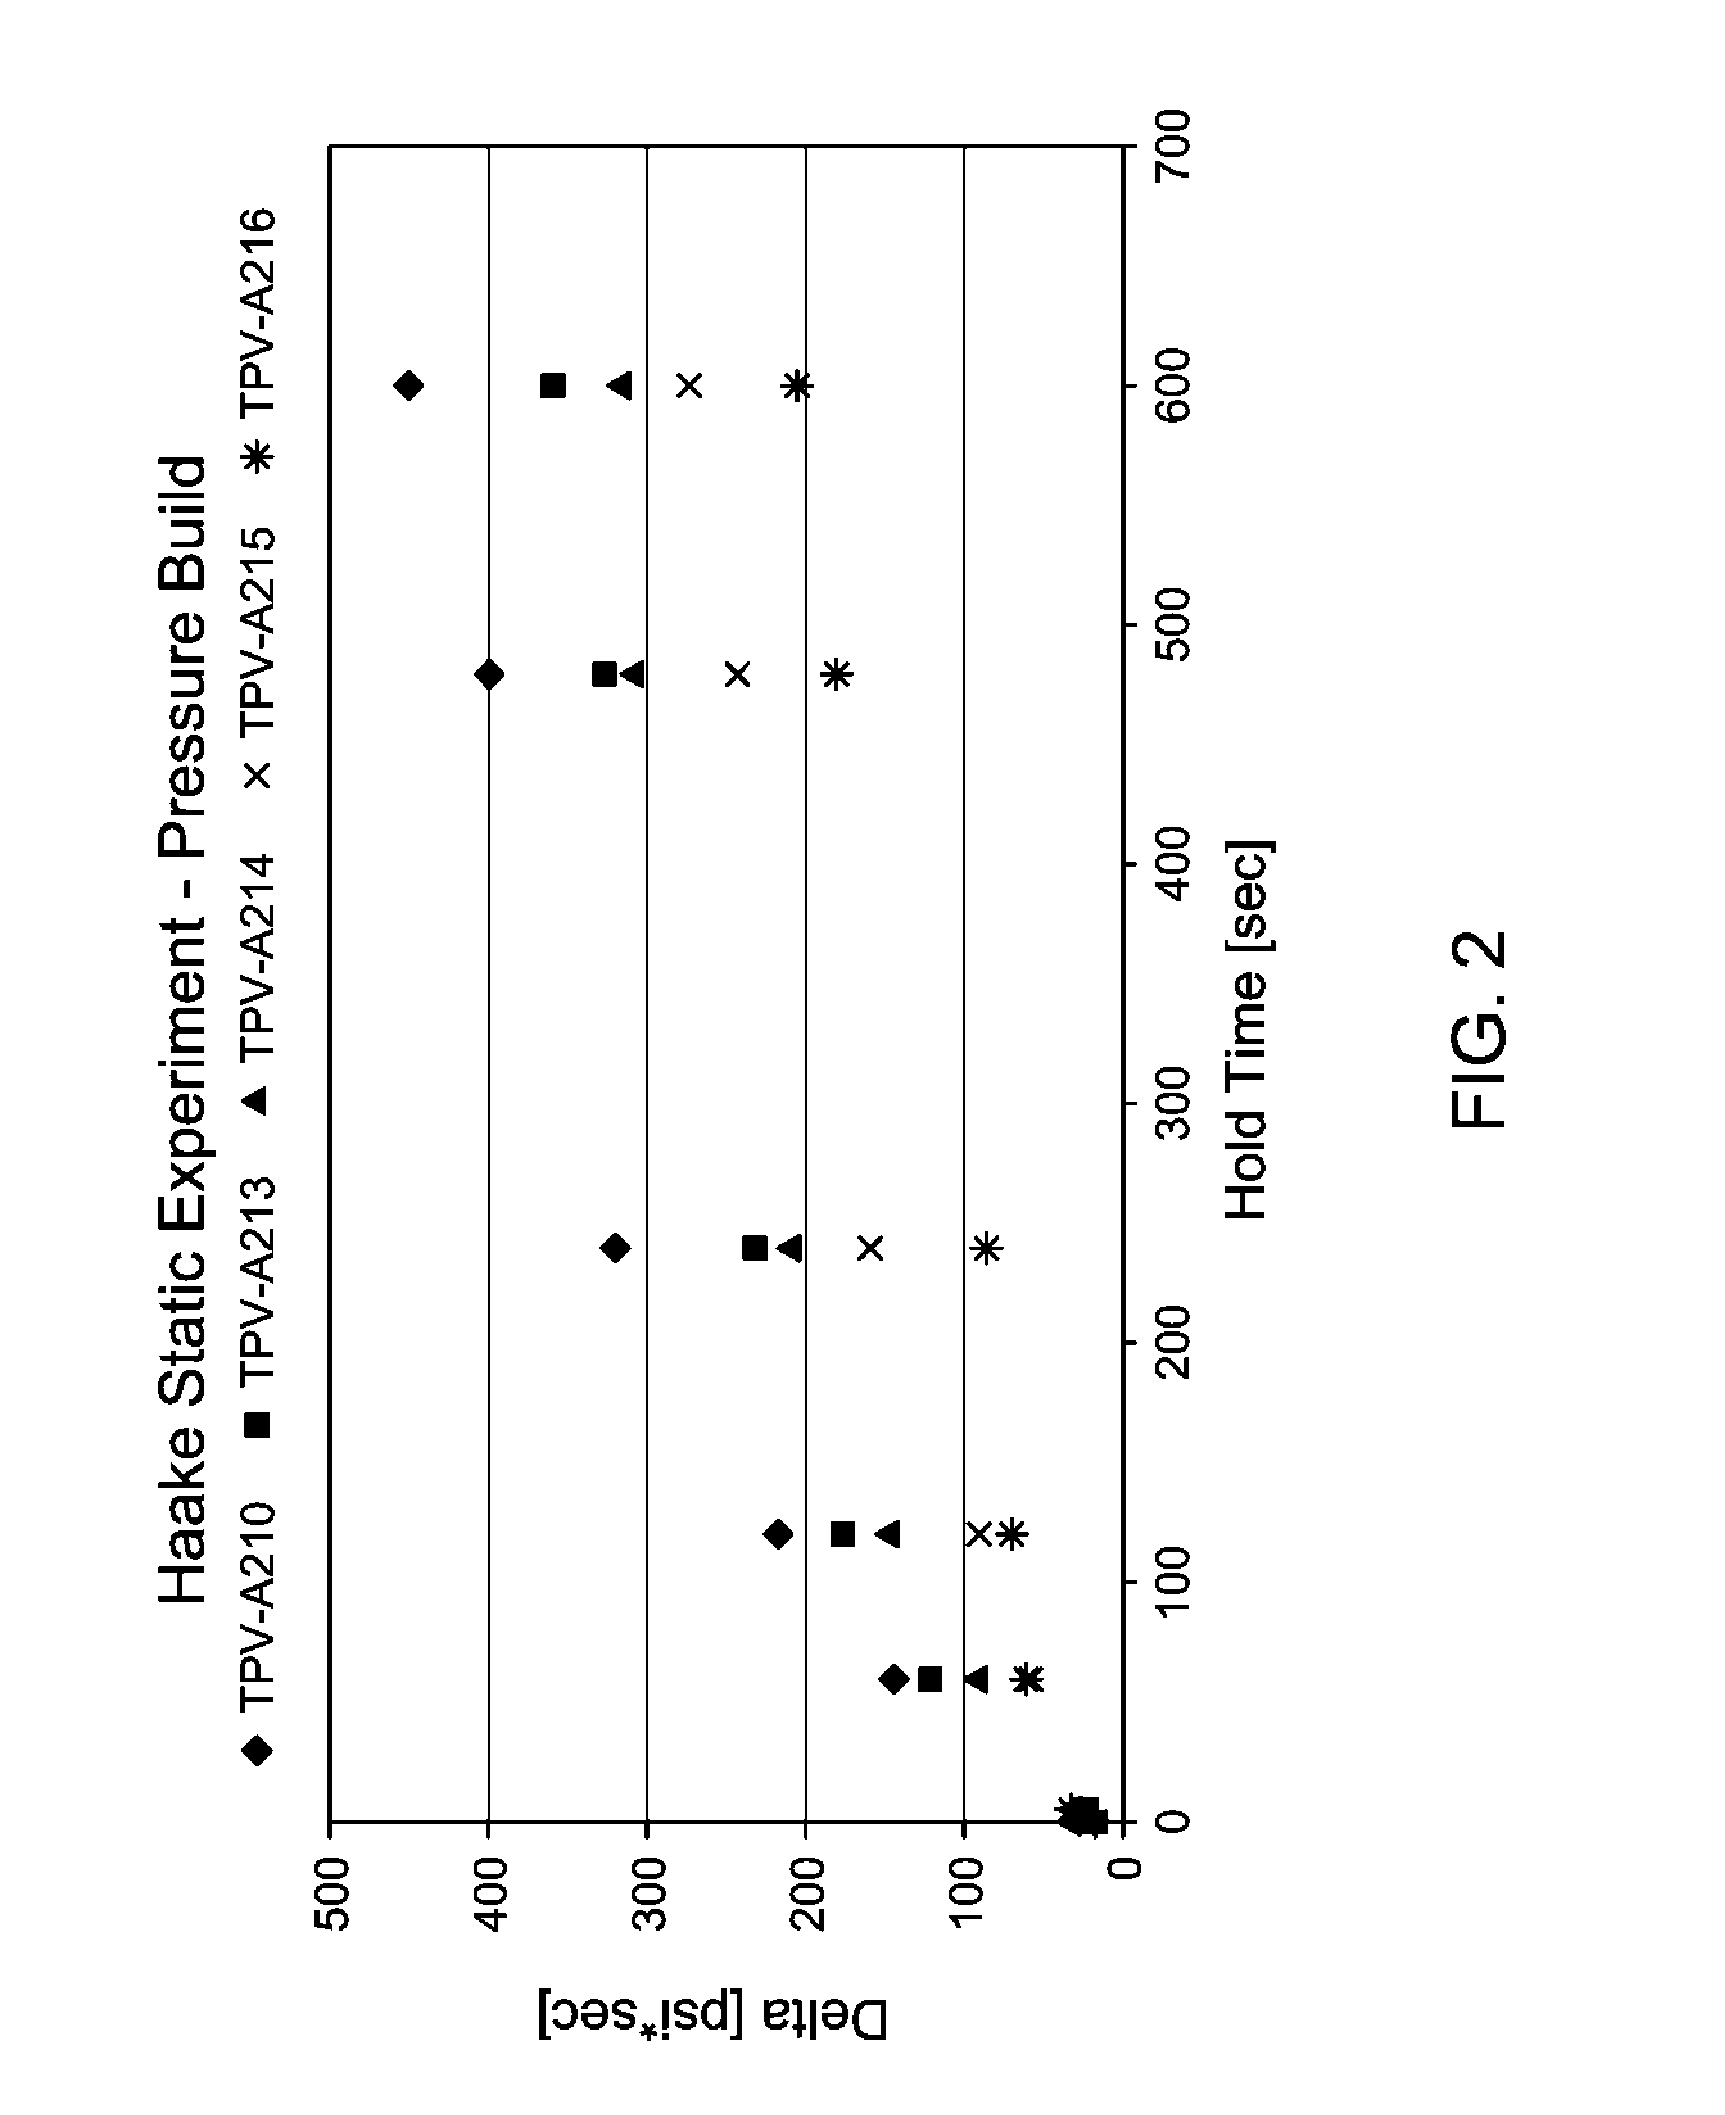 Thermoplastic Vulcanizates Comprising Propylene-Based Elastomers and Methods for Making the Same